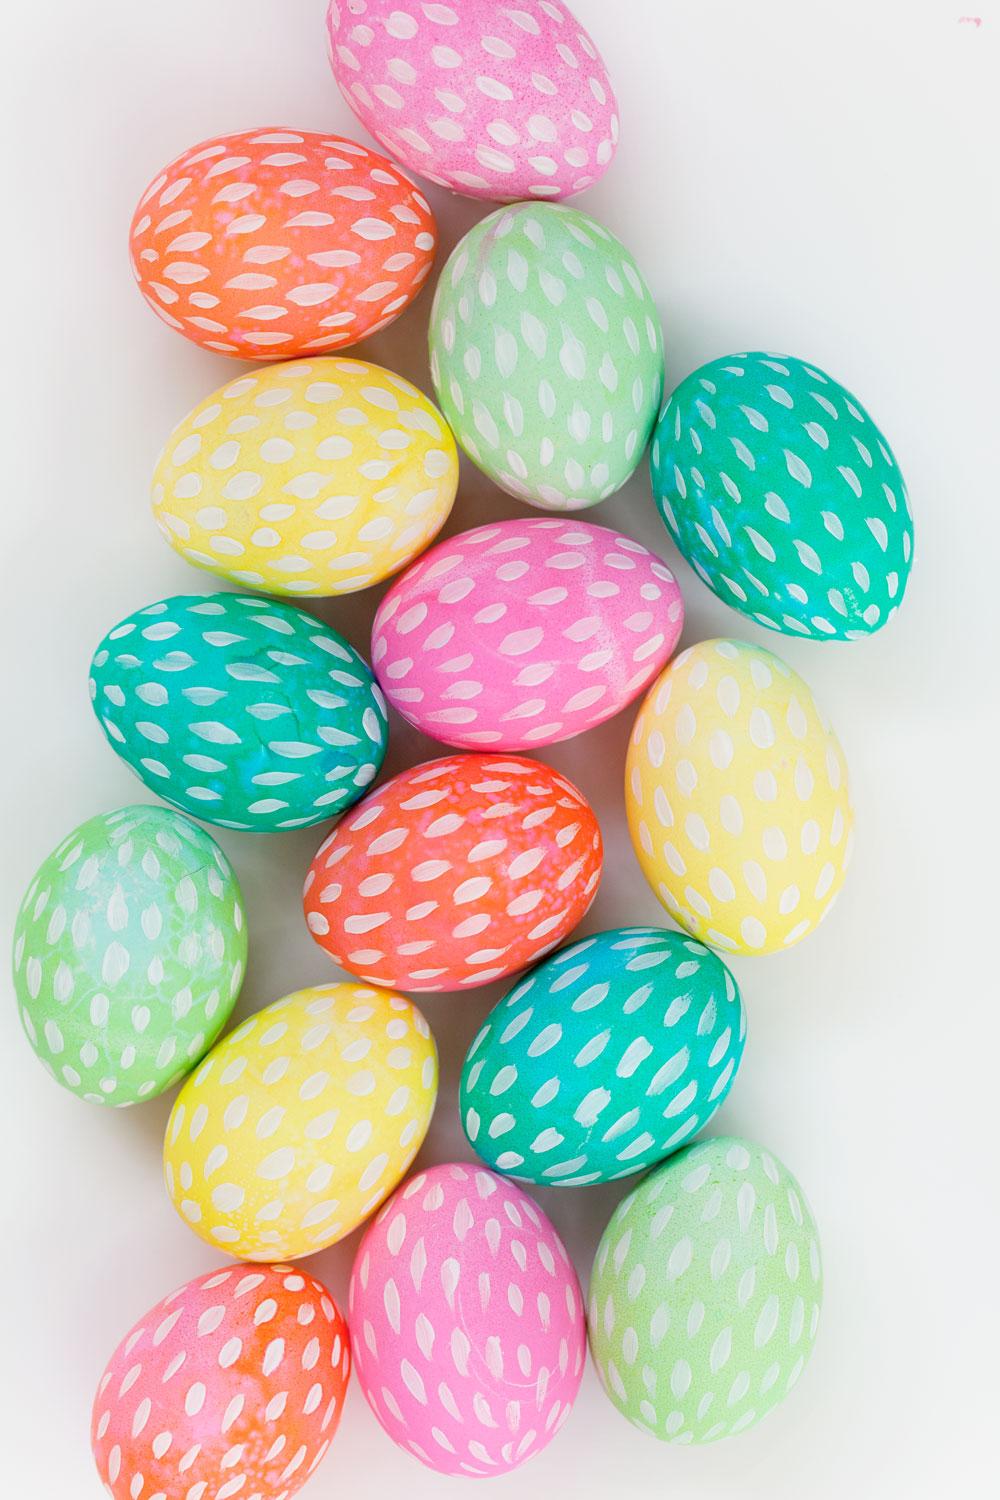 Dyed-and-painted-Easter-Egg-DIY